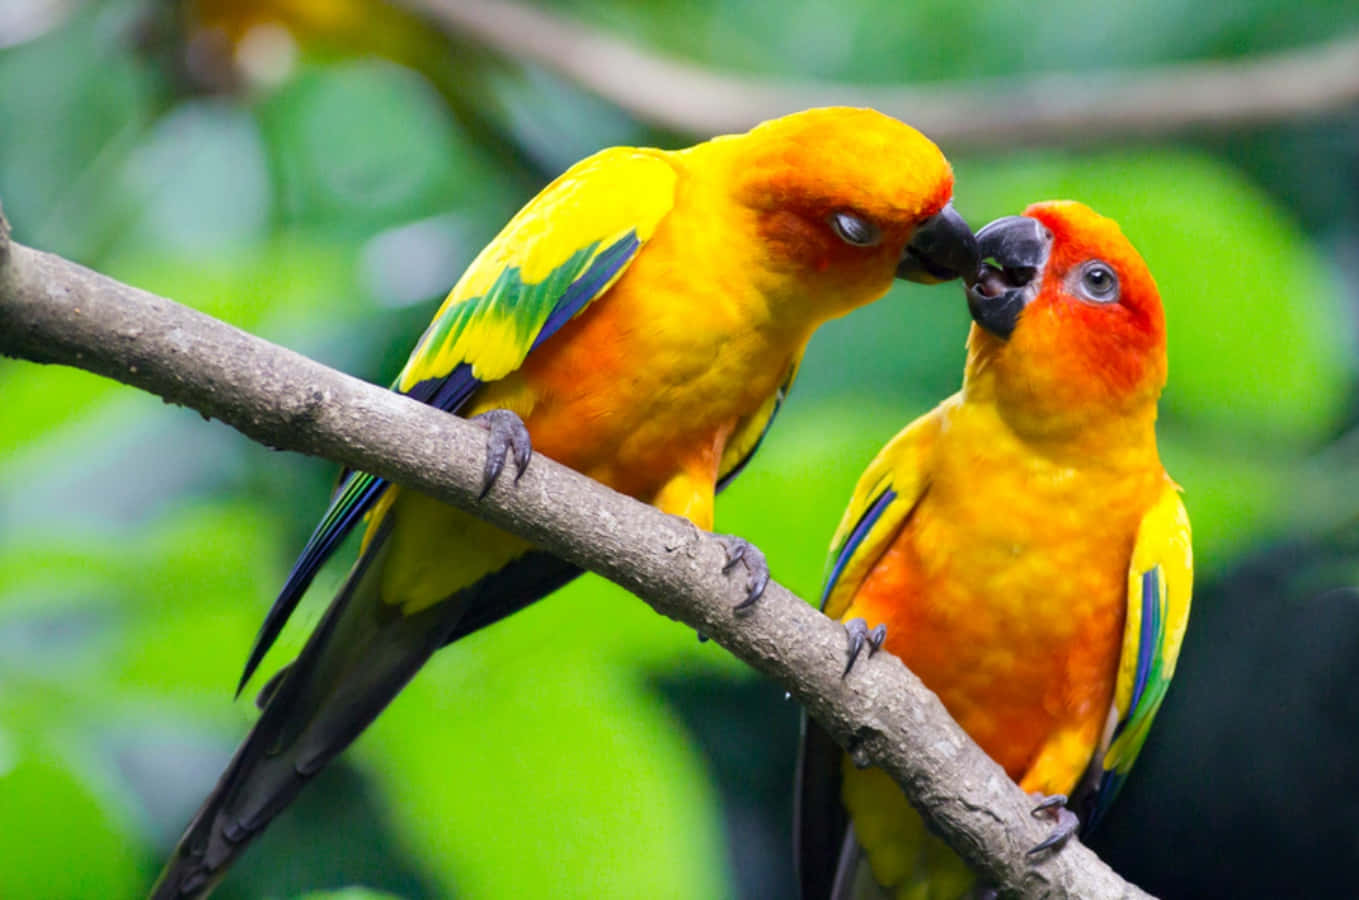 A pair of love birds show their affection for one another.